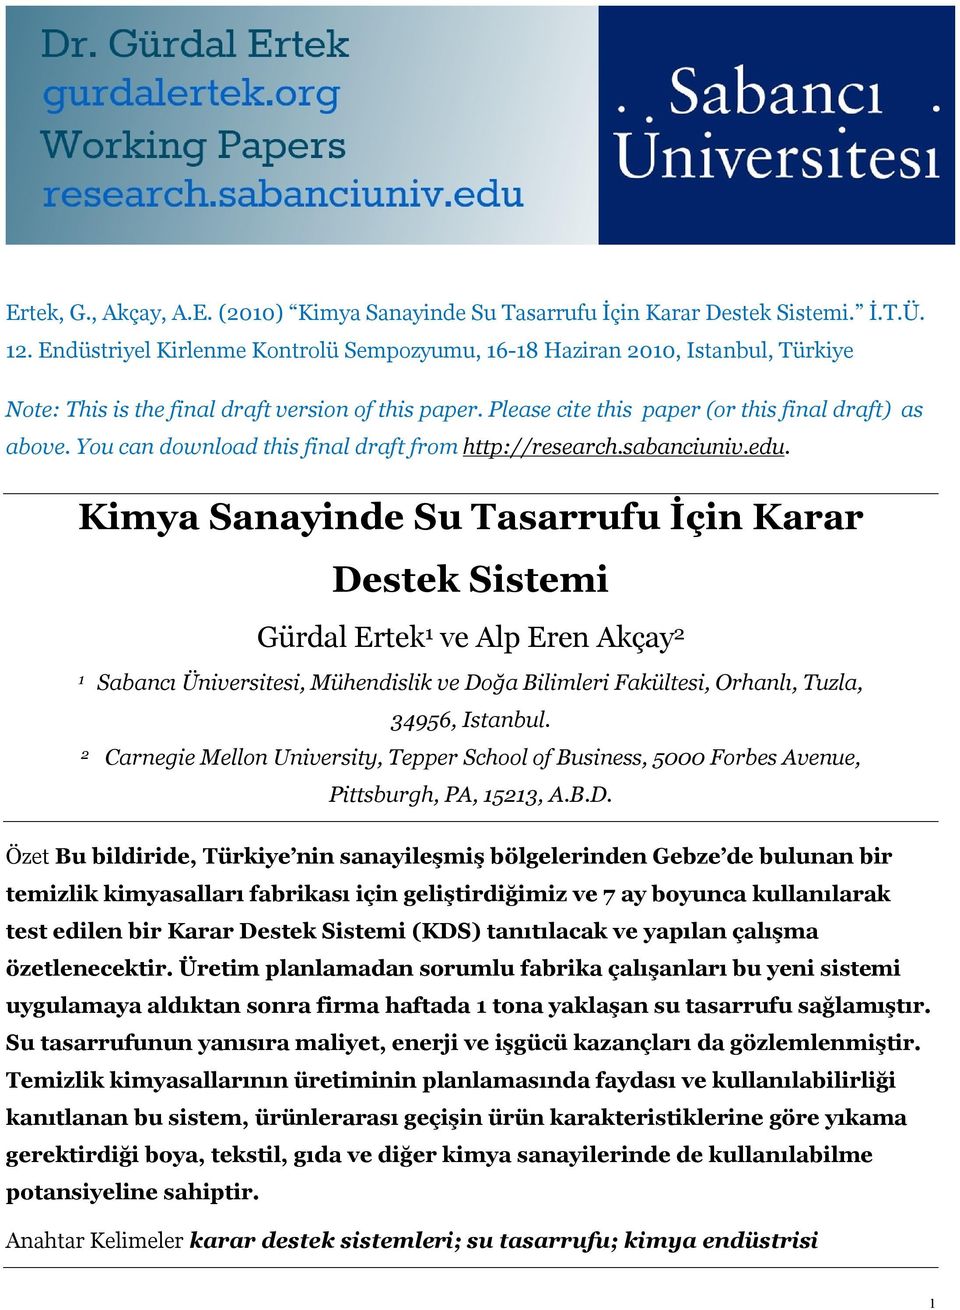 You can download this final draft from http://research.sabanciuniv.edu.